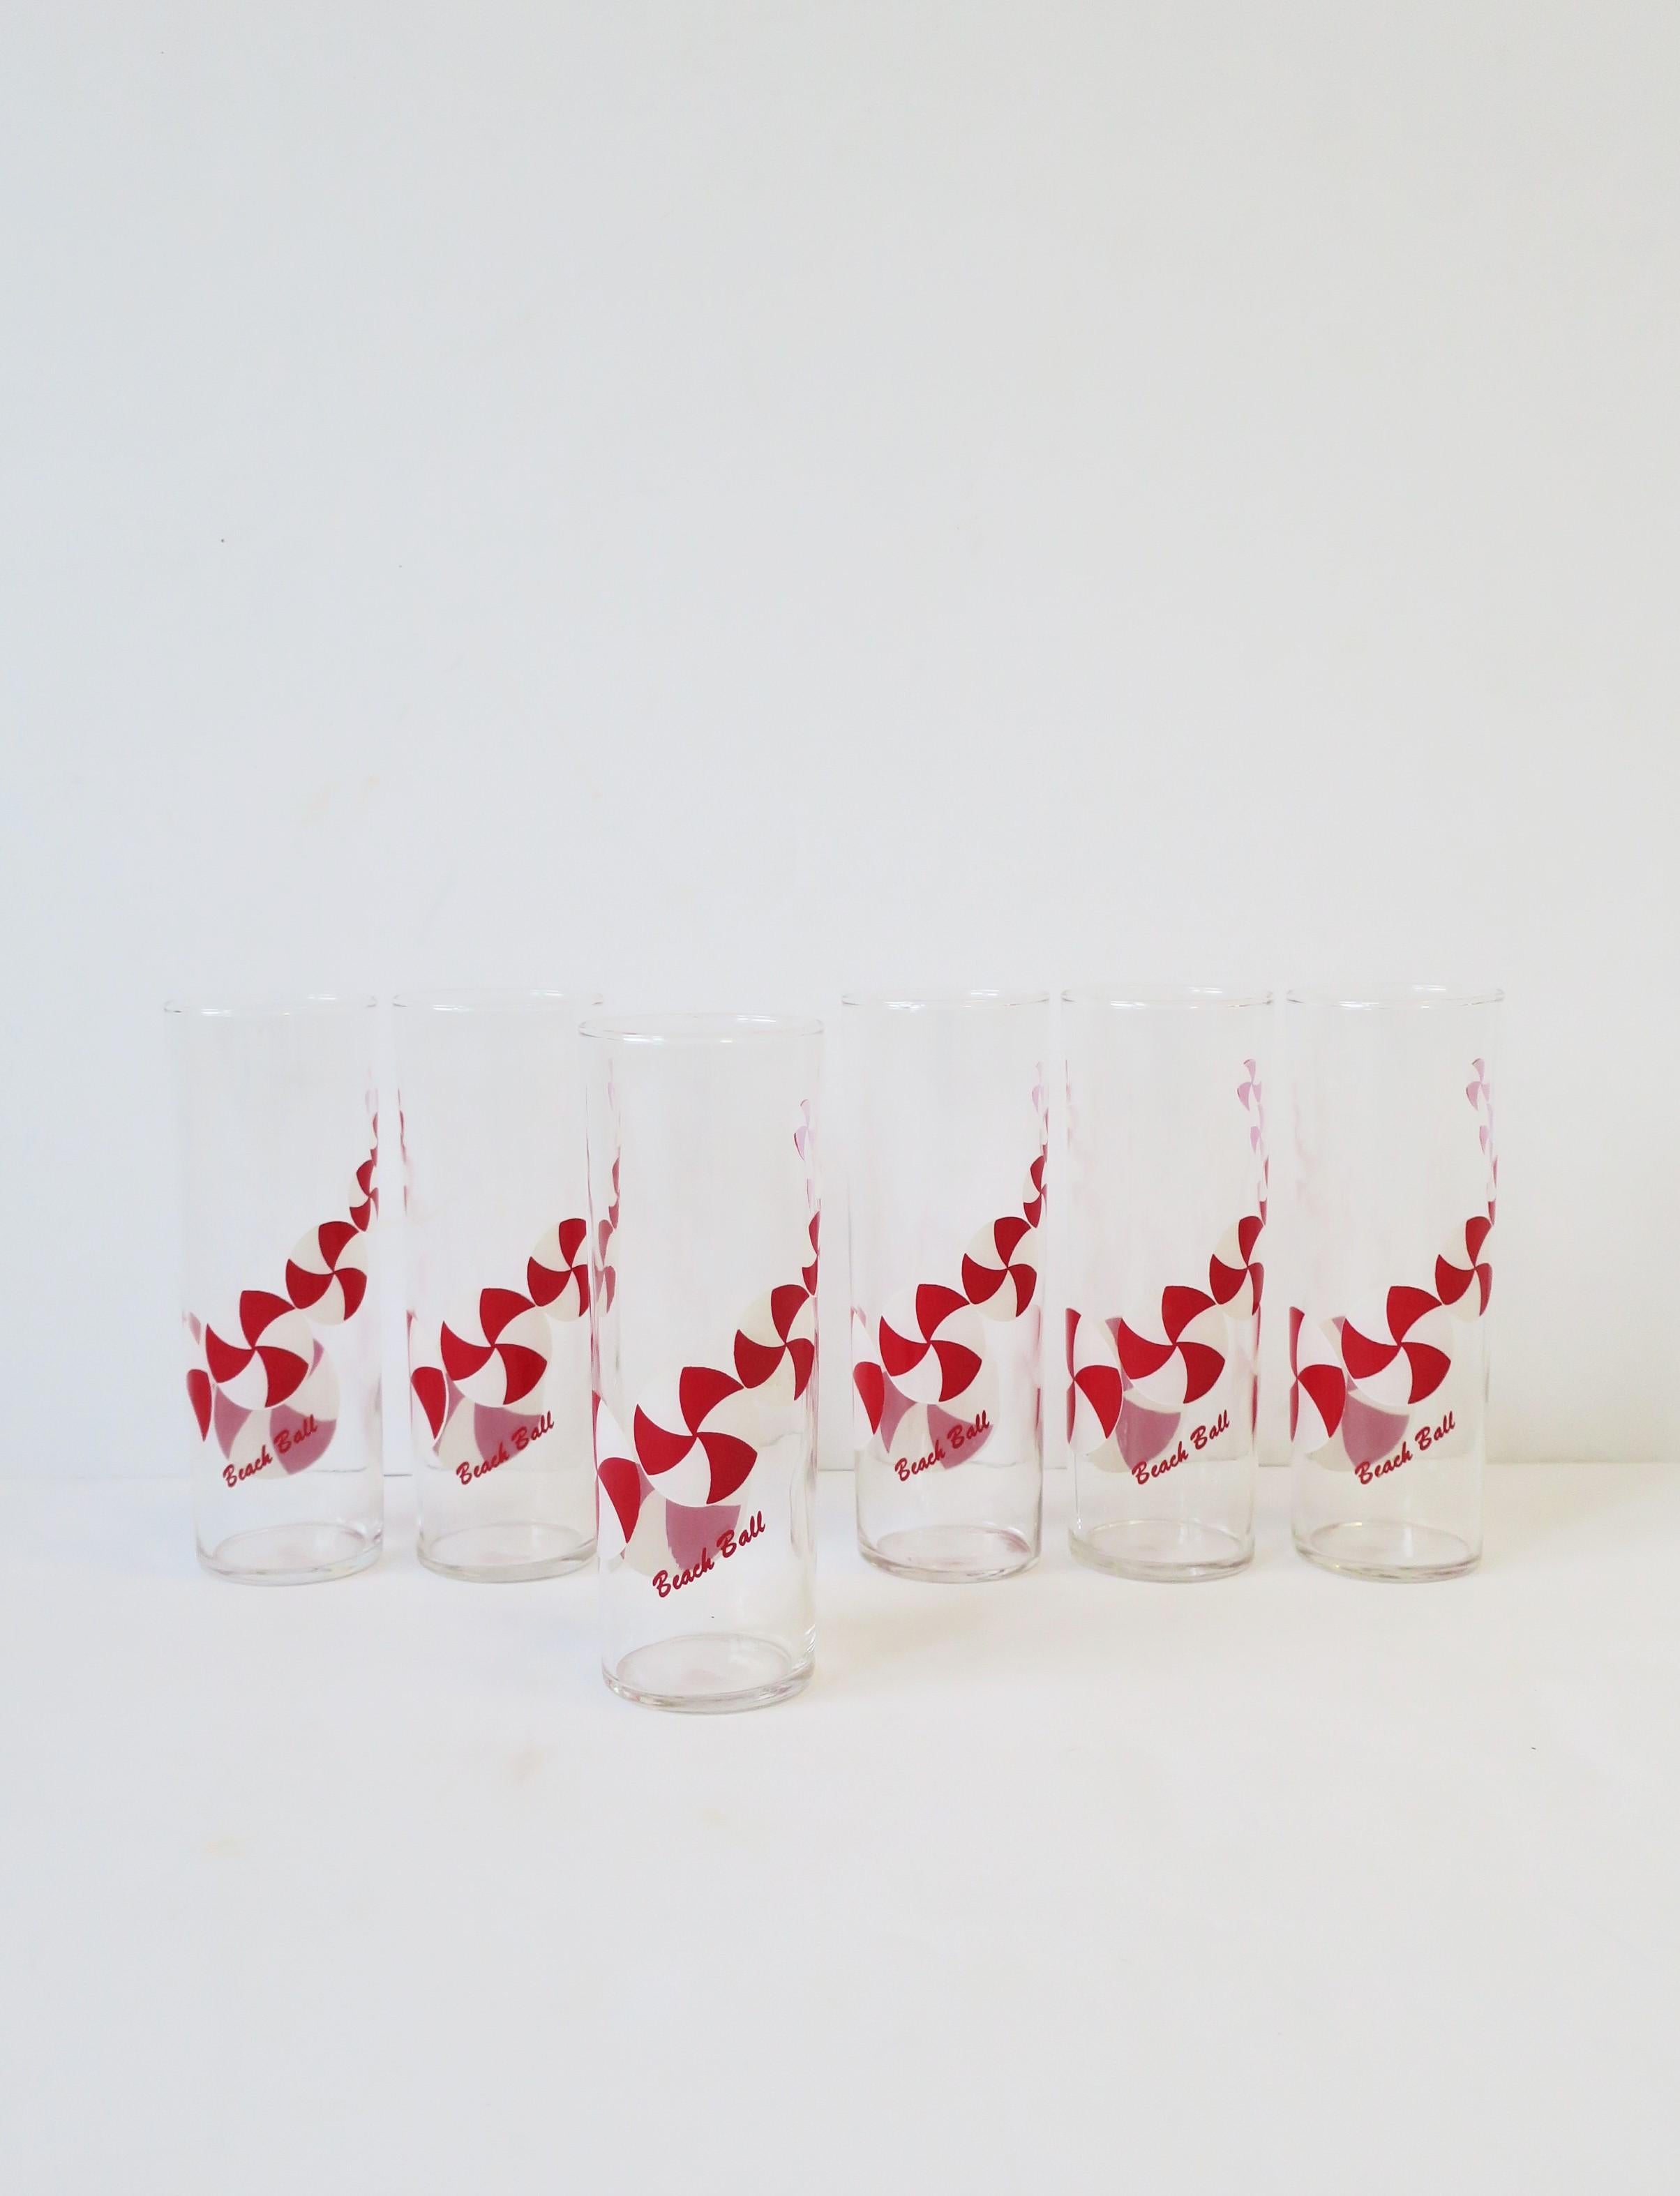 Polychromed Summer Cocktail Highball Glasses with Beach Ball Design in Red & White, 1930s For Sale